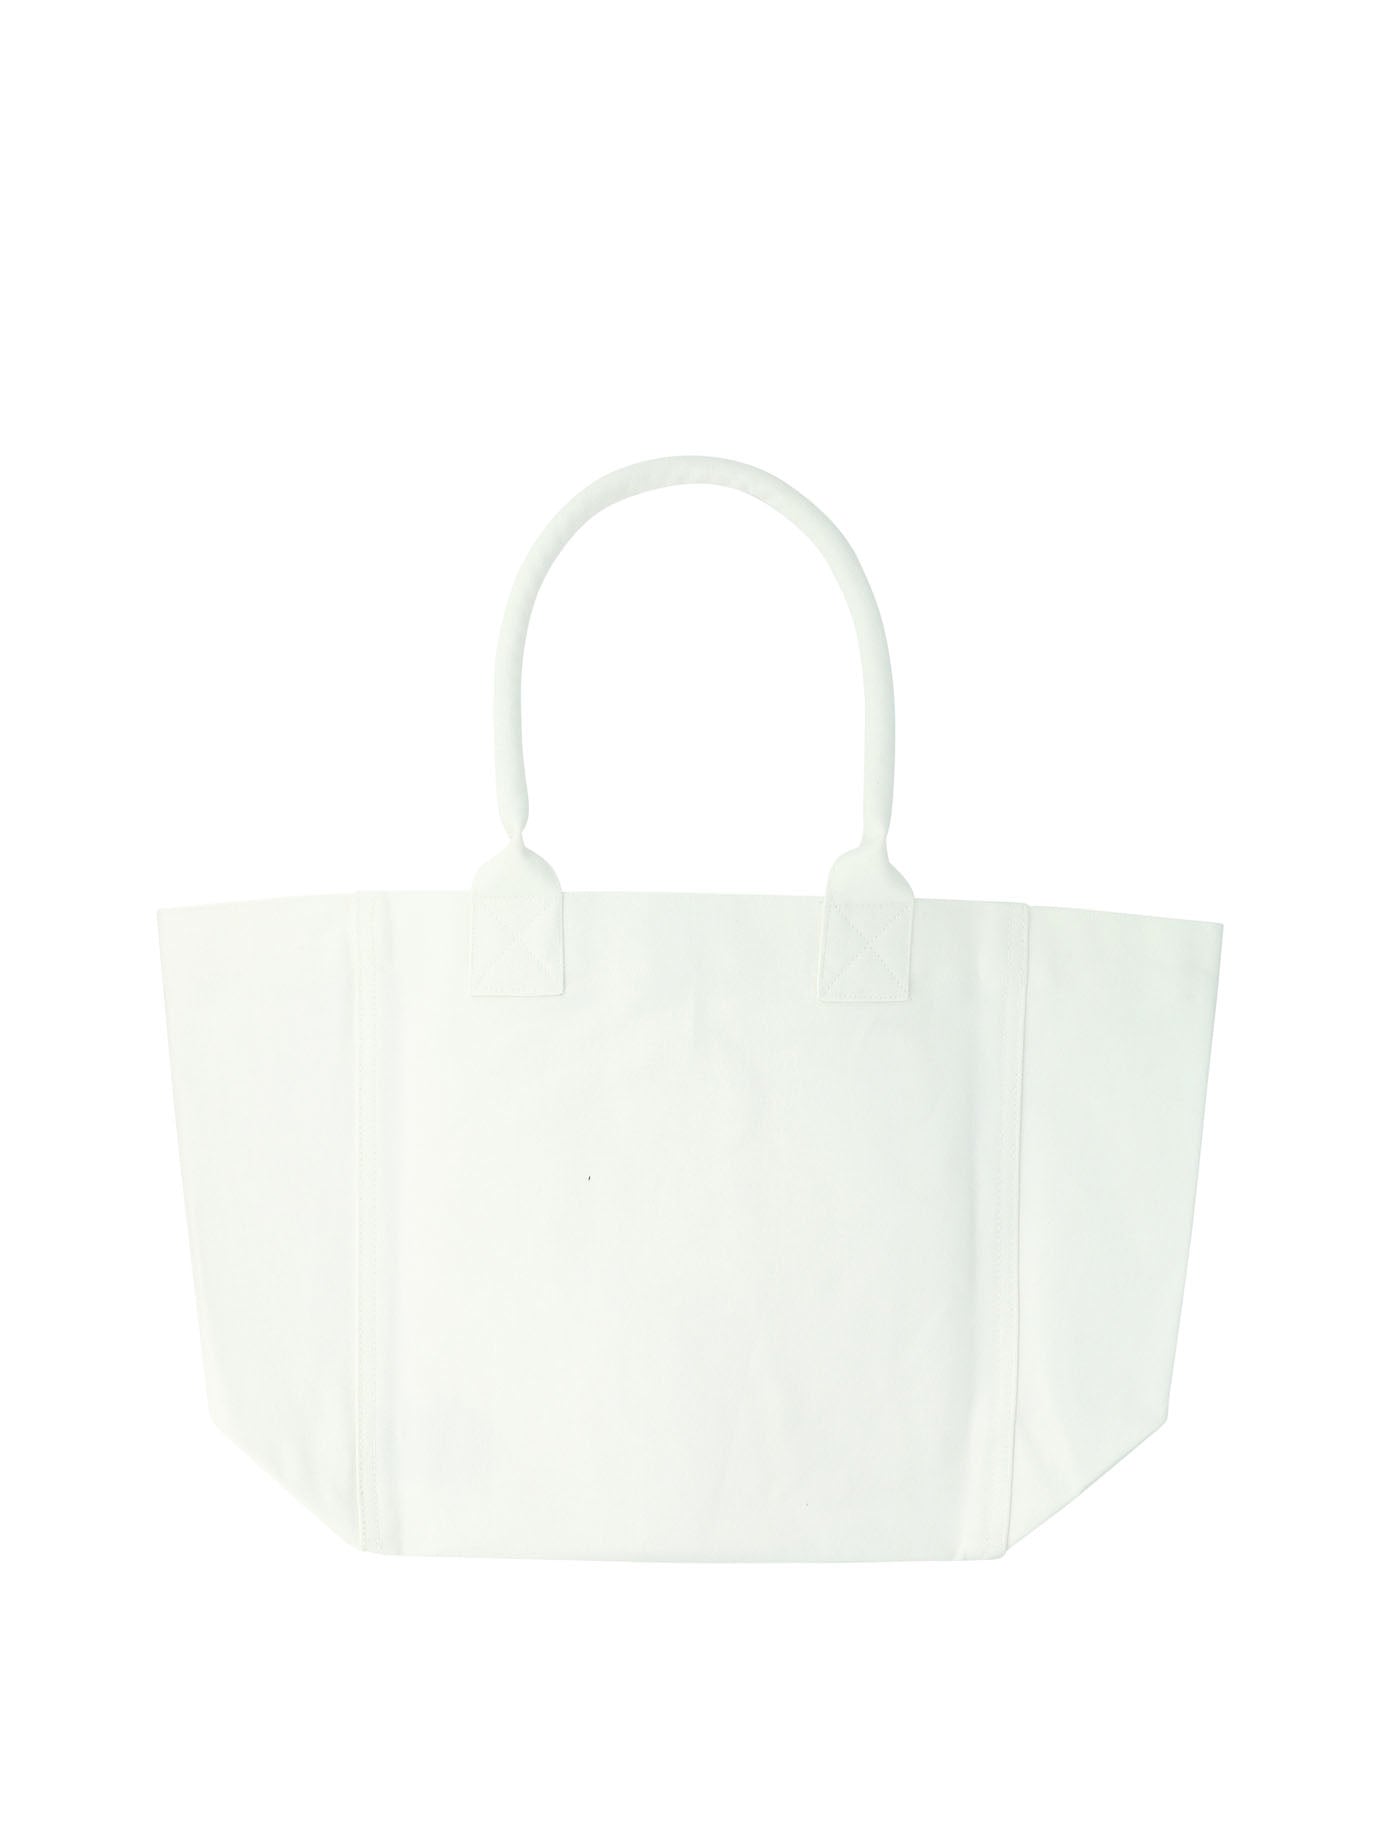 Isabel Marant Small Yenky Tote Bag